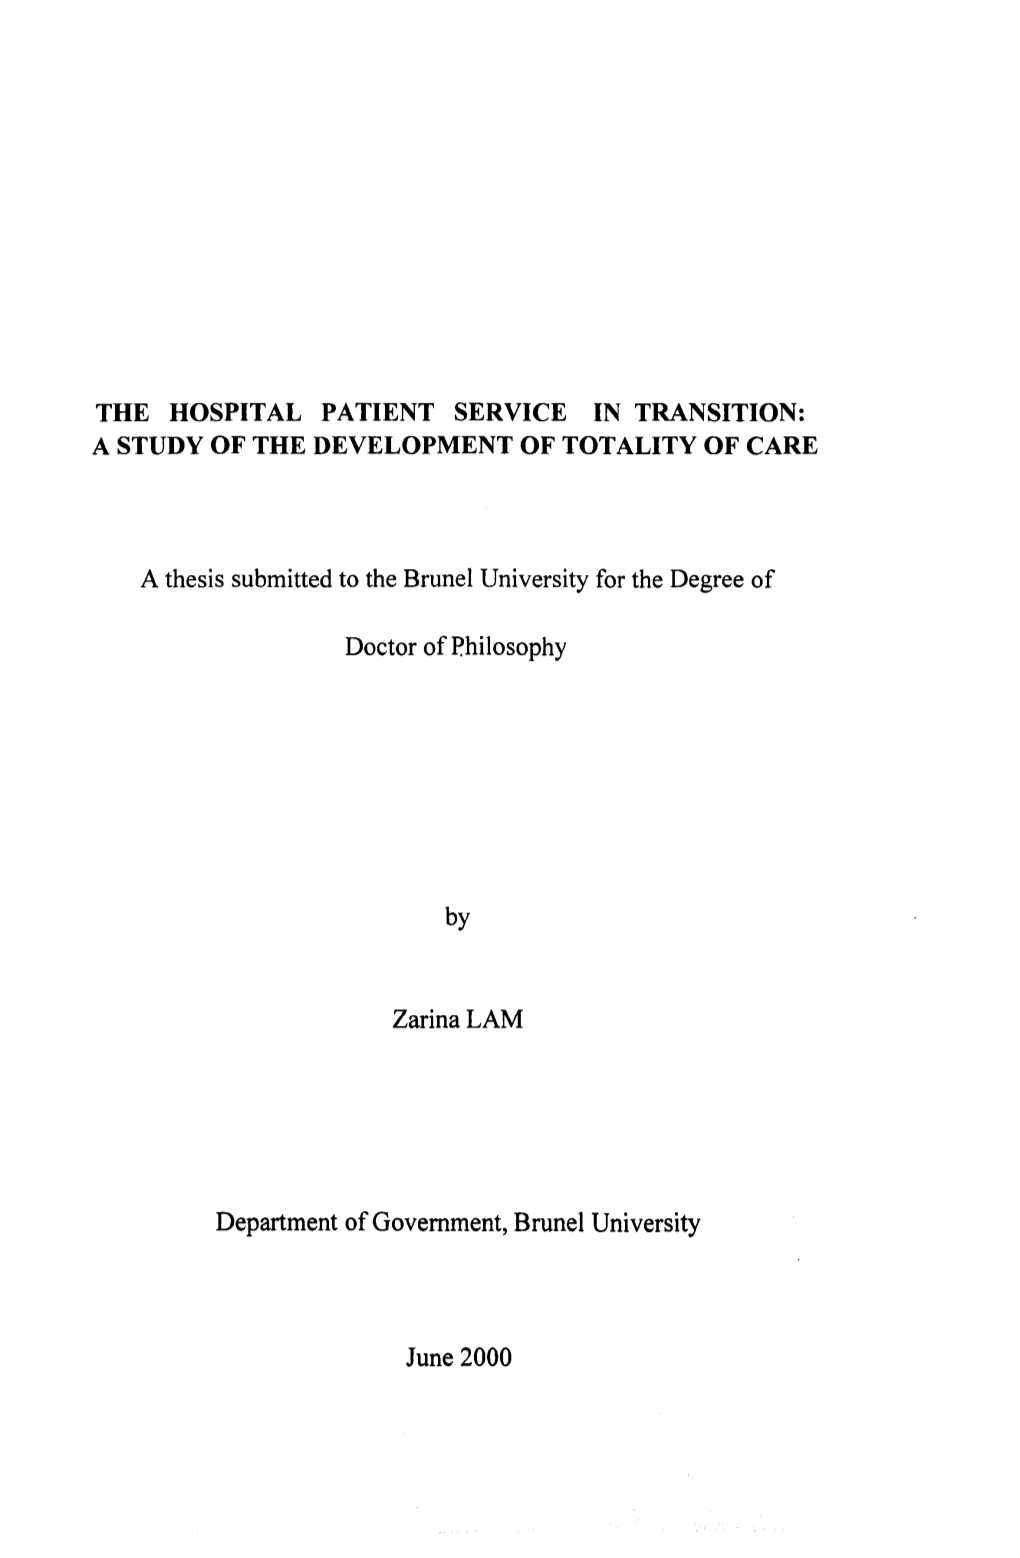 The Hospital Patient Service in Transition: a Study of the Development of Totality of Care